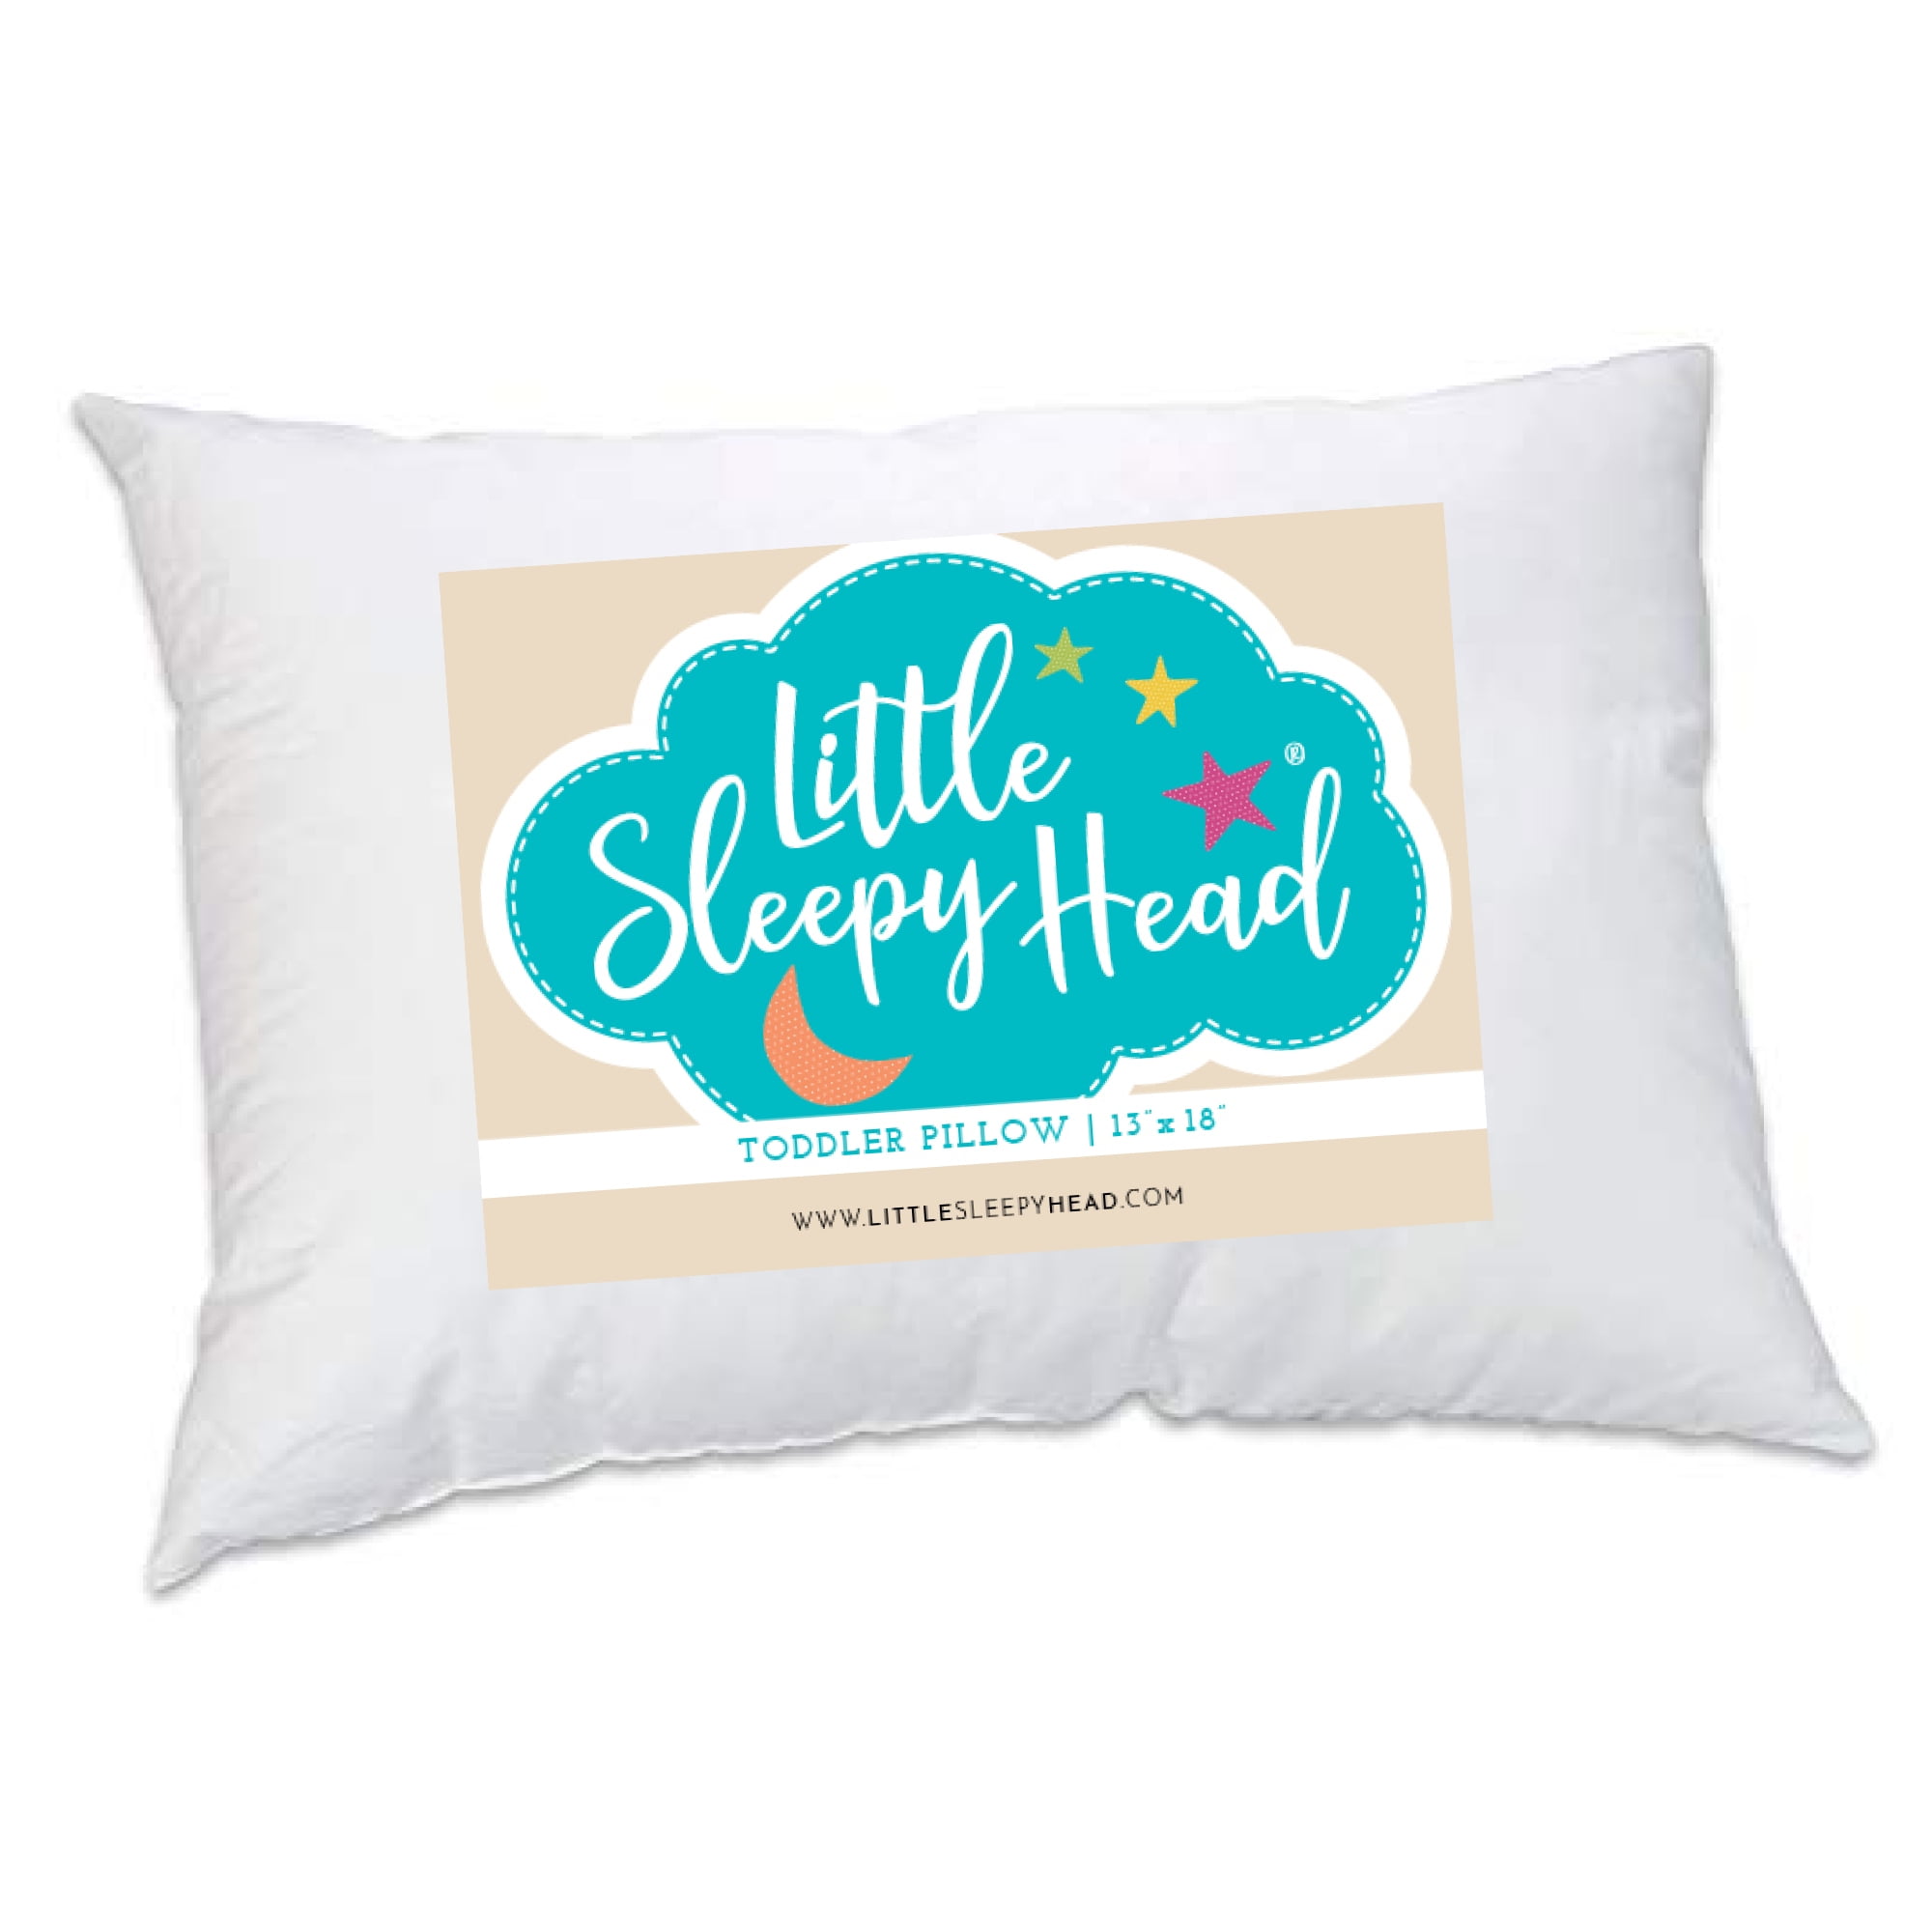 PharMeDoc Toddler Pillow Little Pillow for Kids Ages 1-5 14" x 19 inches 